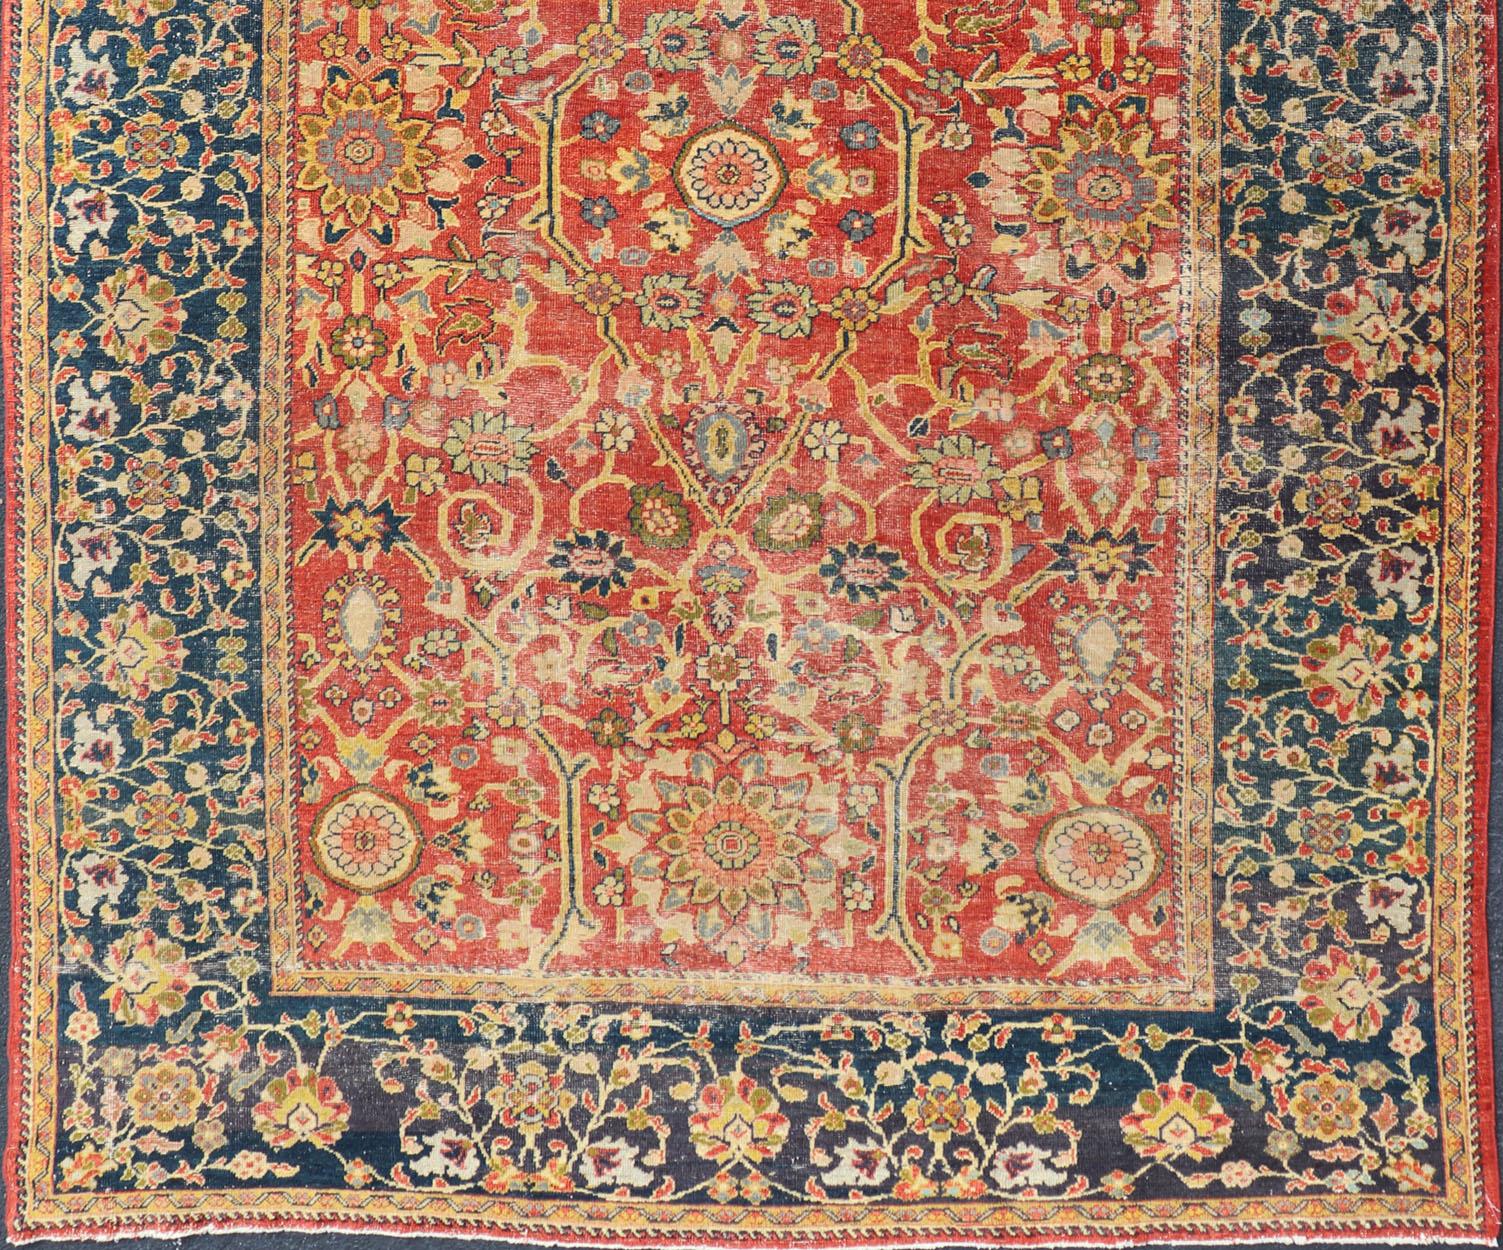 Antique Persian, 19th Century Sultanabad Rug in Rust, Blue, Gold, Yellow & Green In Good Condition For Sale In Atlanta, GA